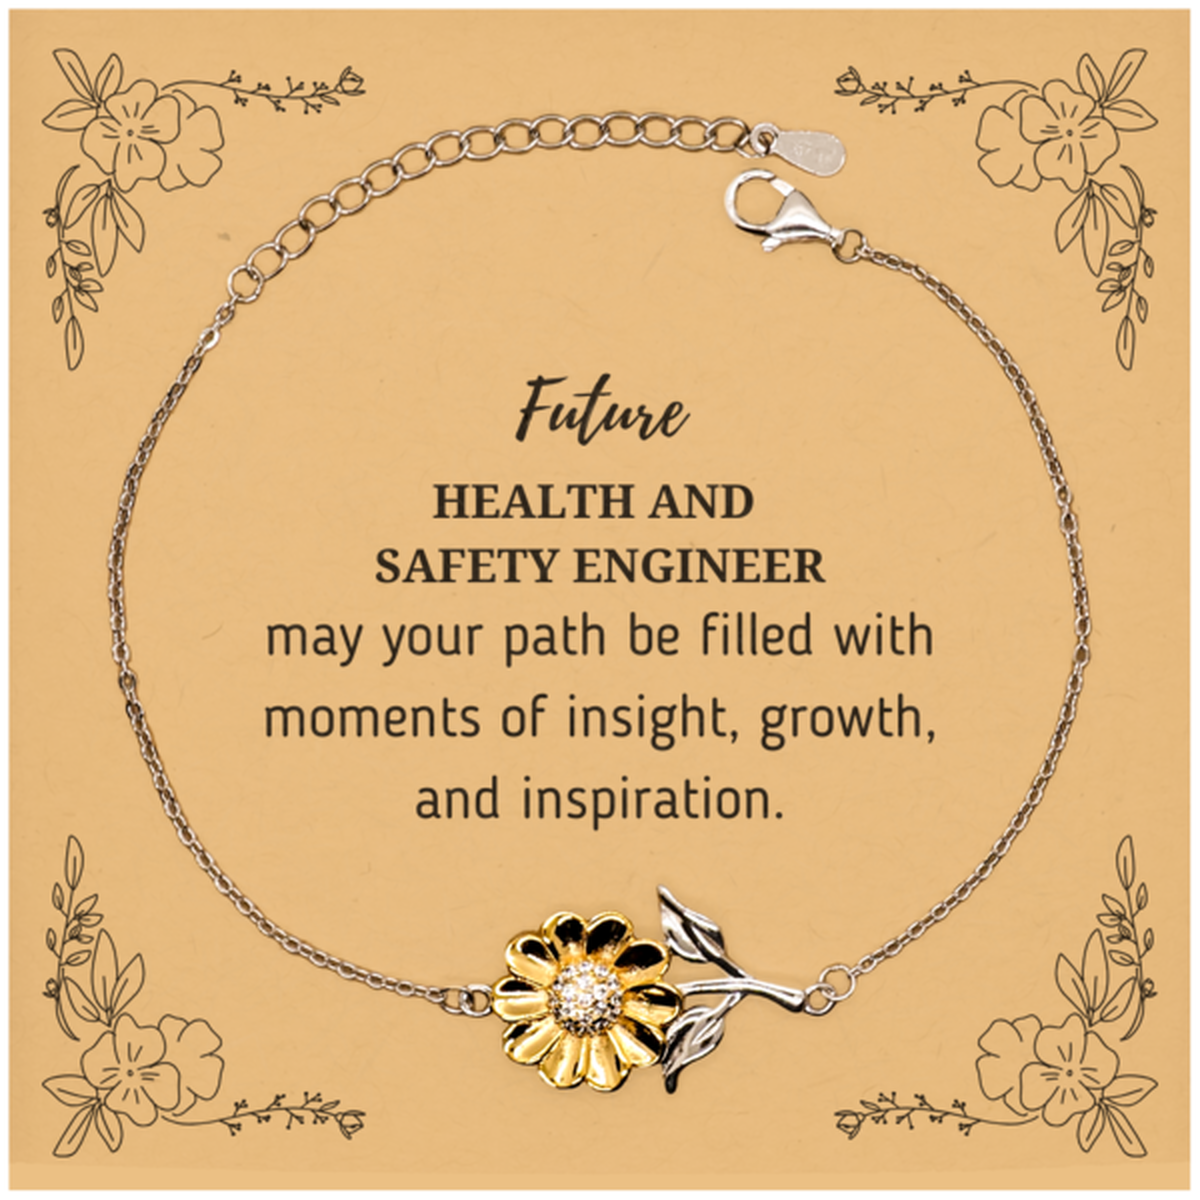 Future Health and Safety Engineer Gifts, May your path be filled with moments of insight, Graduation Gifts for New Health and Safety Engineer, Christmas Unique Sunflower Bracelet For Men, Women, Friends